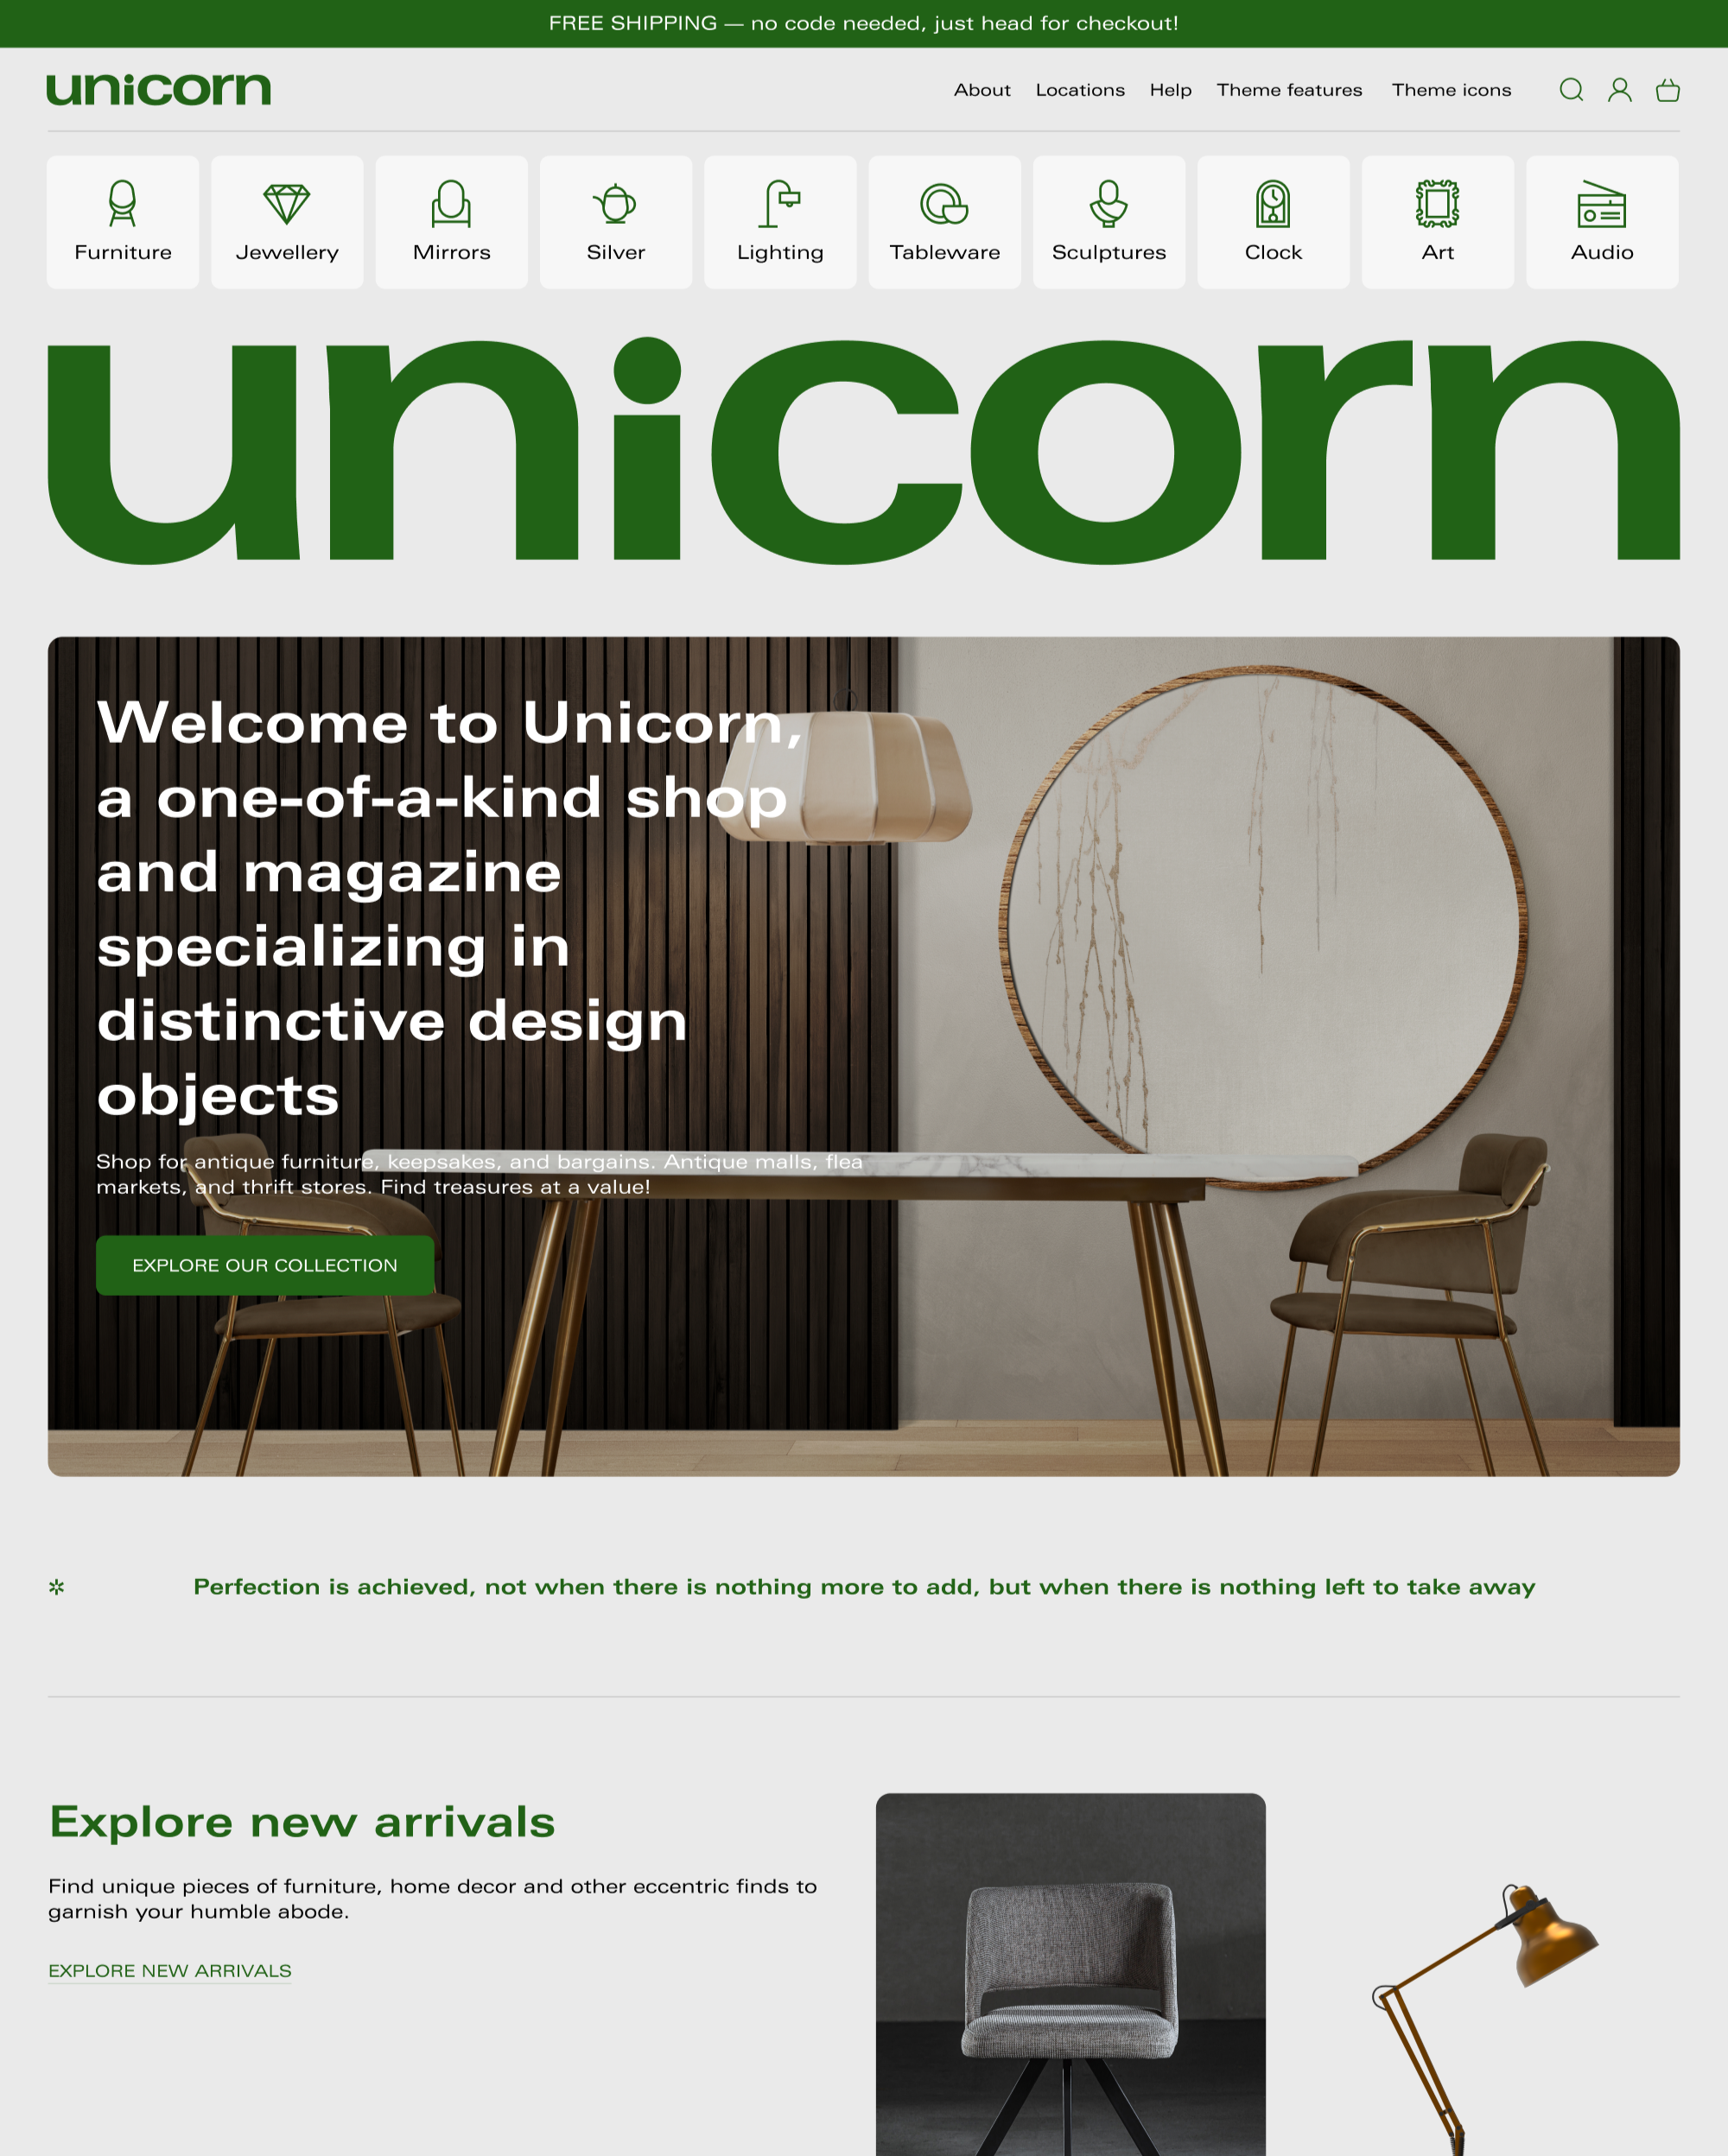 Desktop preview for Unicorn in the "Valuable" style